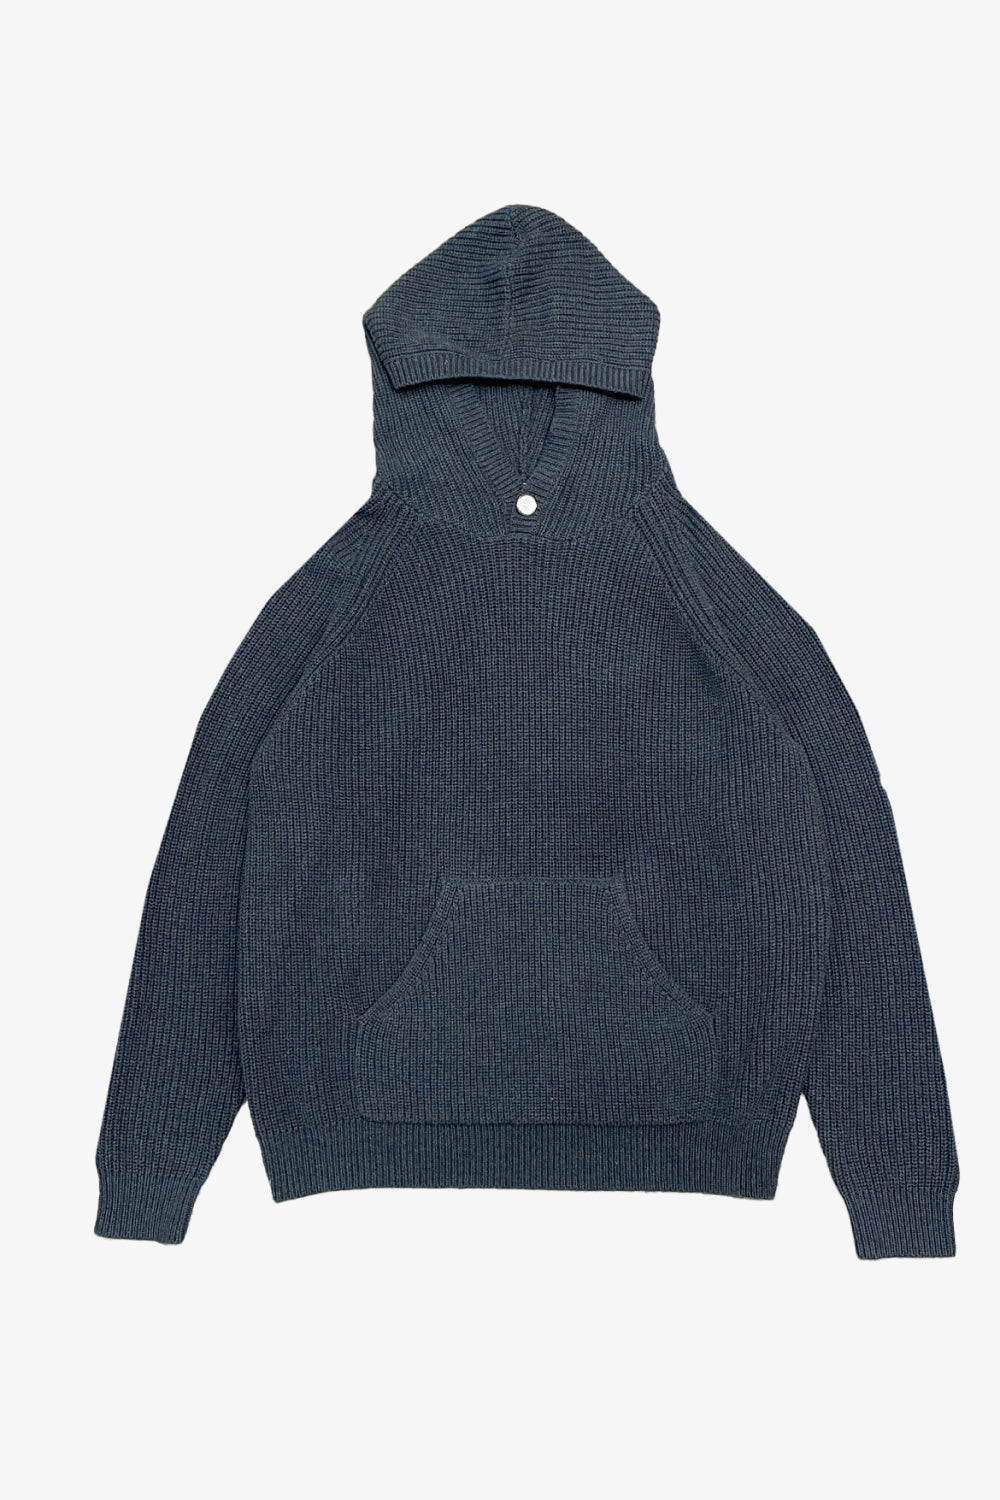 Wool Knit Pearl Button Hoodie